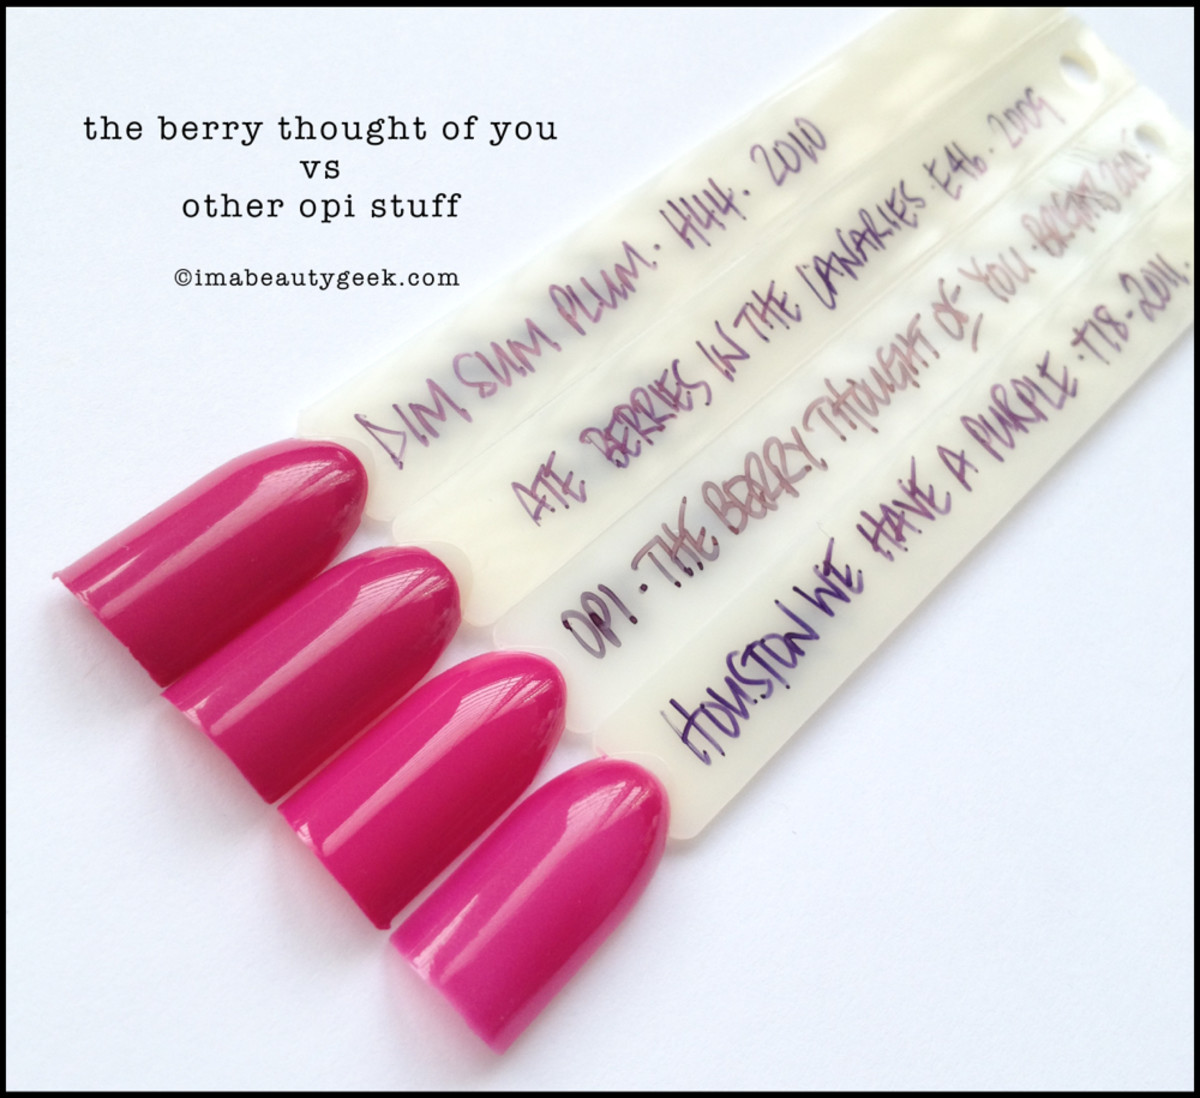 OPI Brights 2015 Comparisons_OPI The Berry Thought of You Comparison